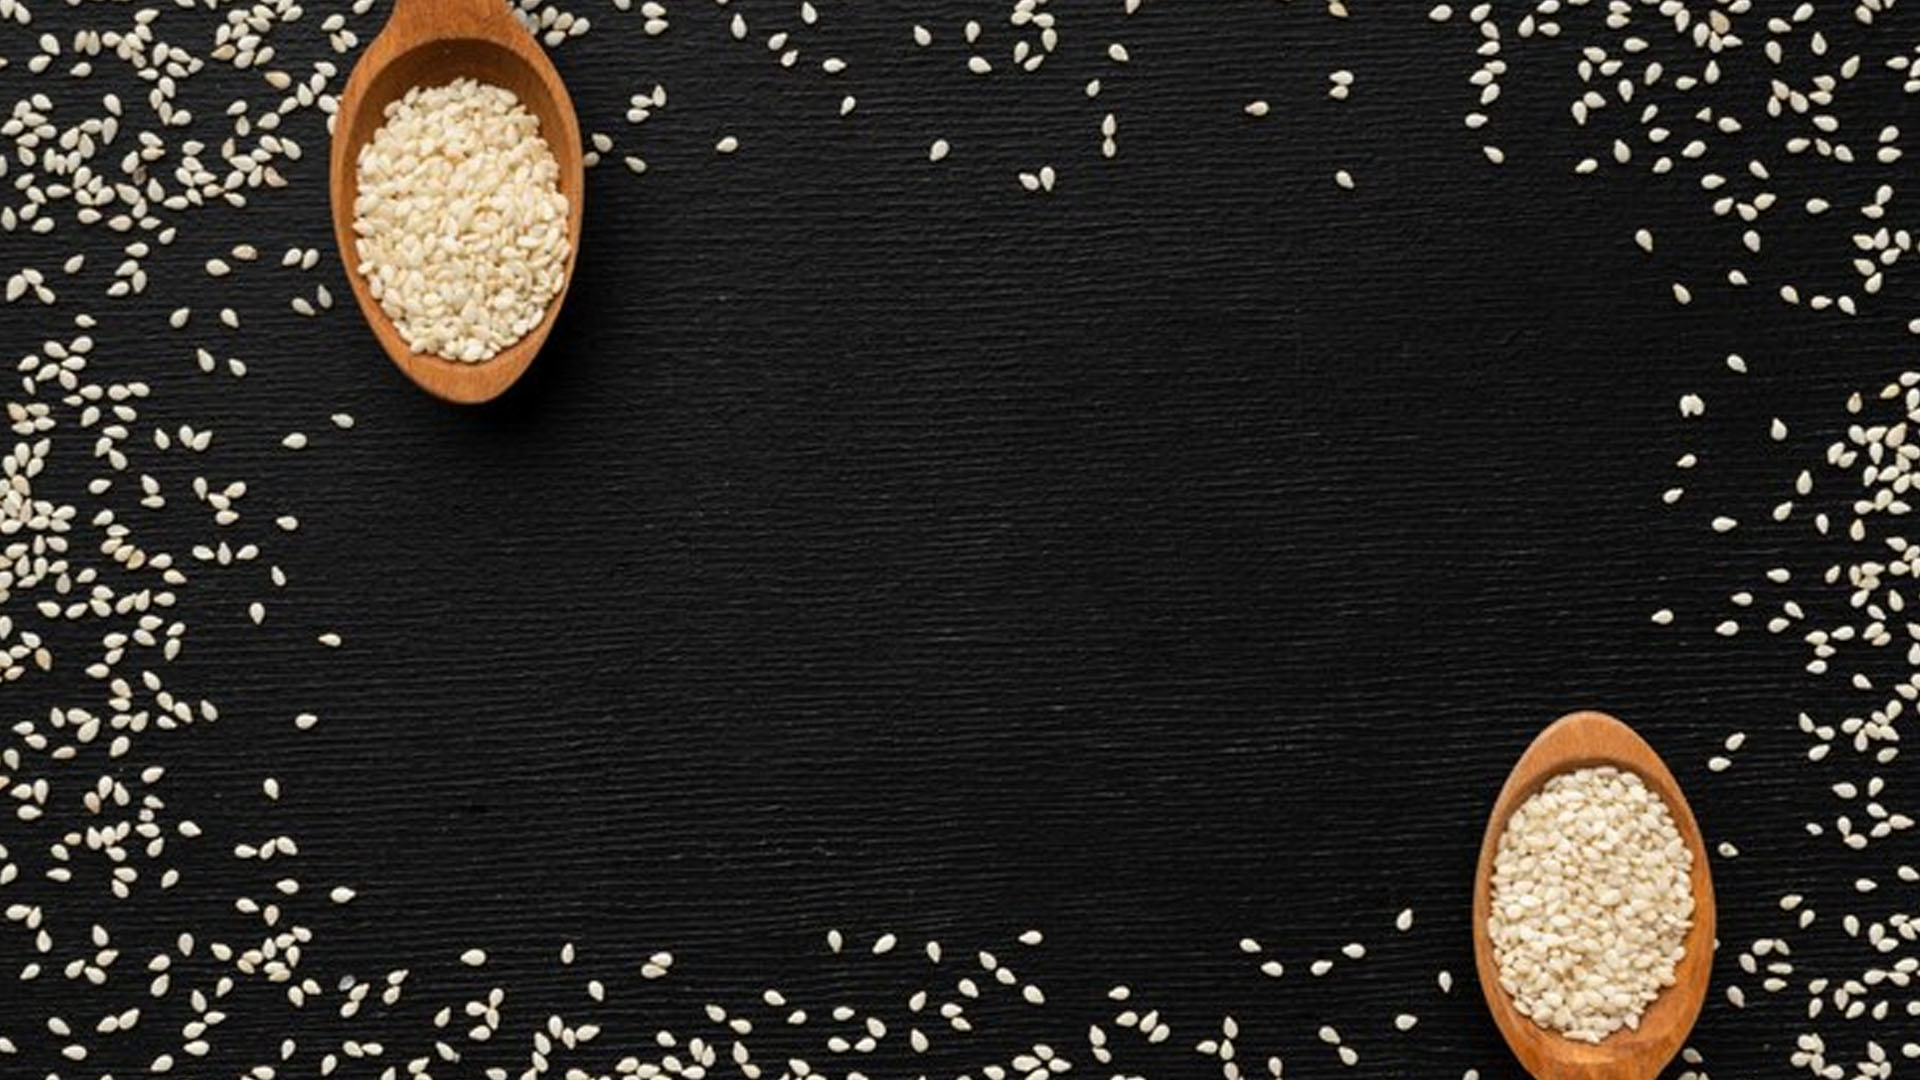 What are the Health Benefits of Sesame Seeds?